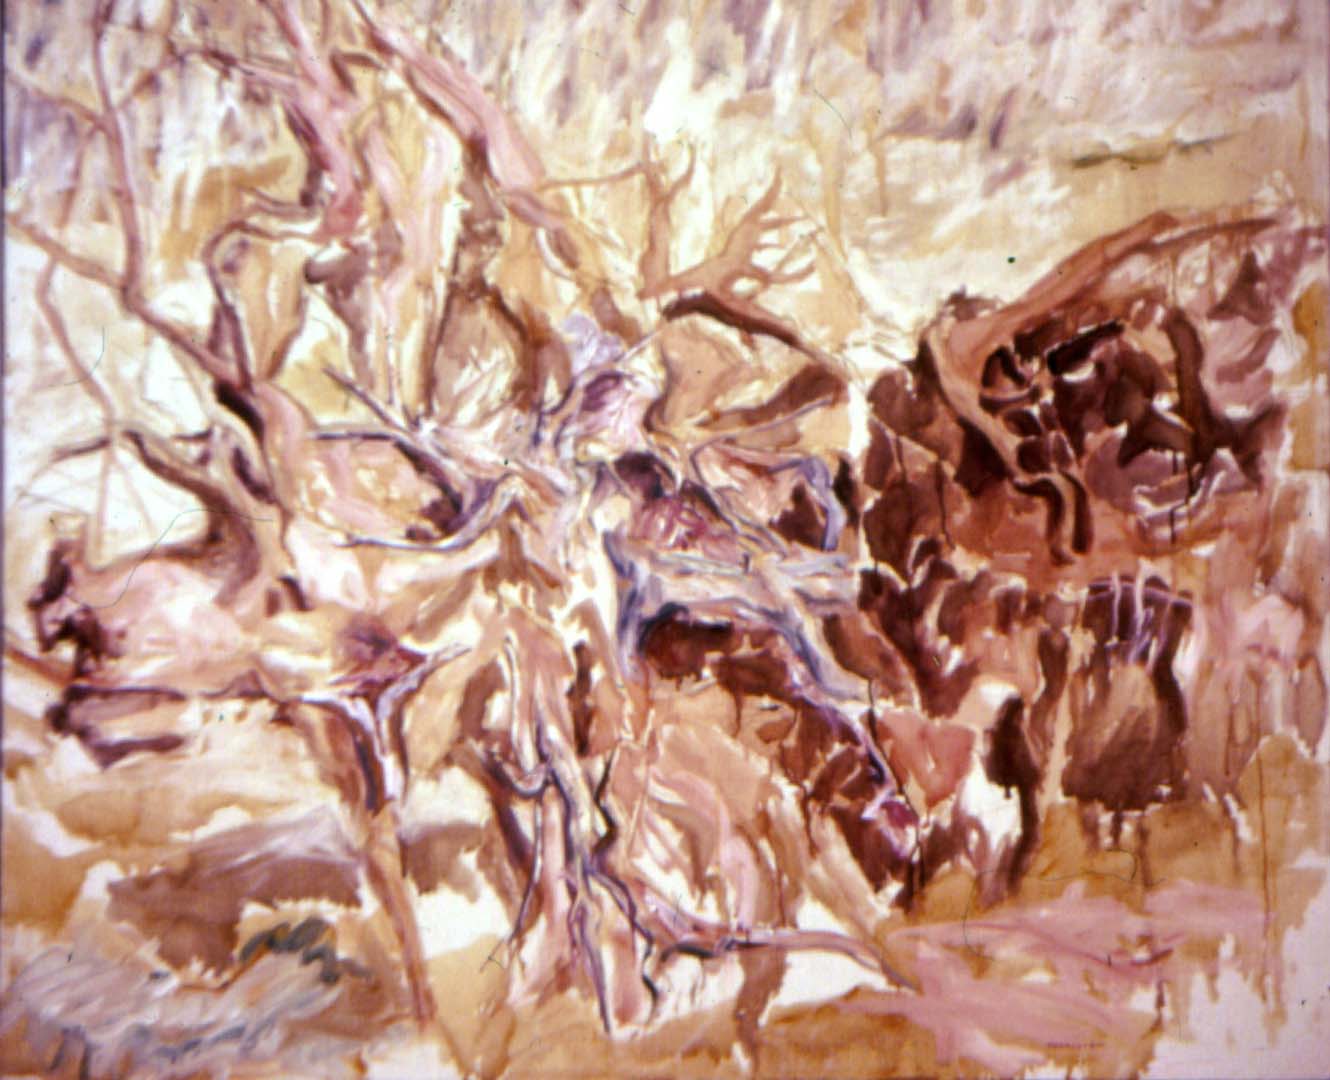 1958 Tree Roots #1 Oil on Canvas 44 x 52